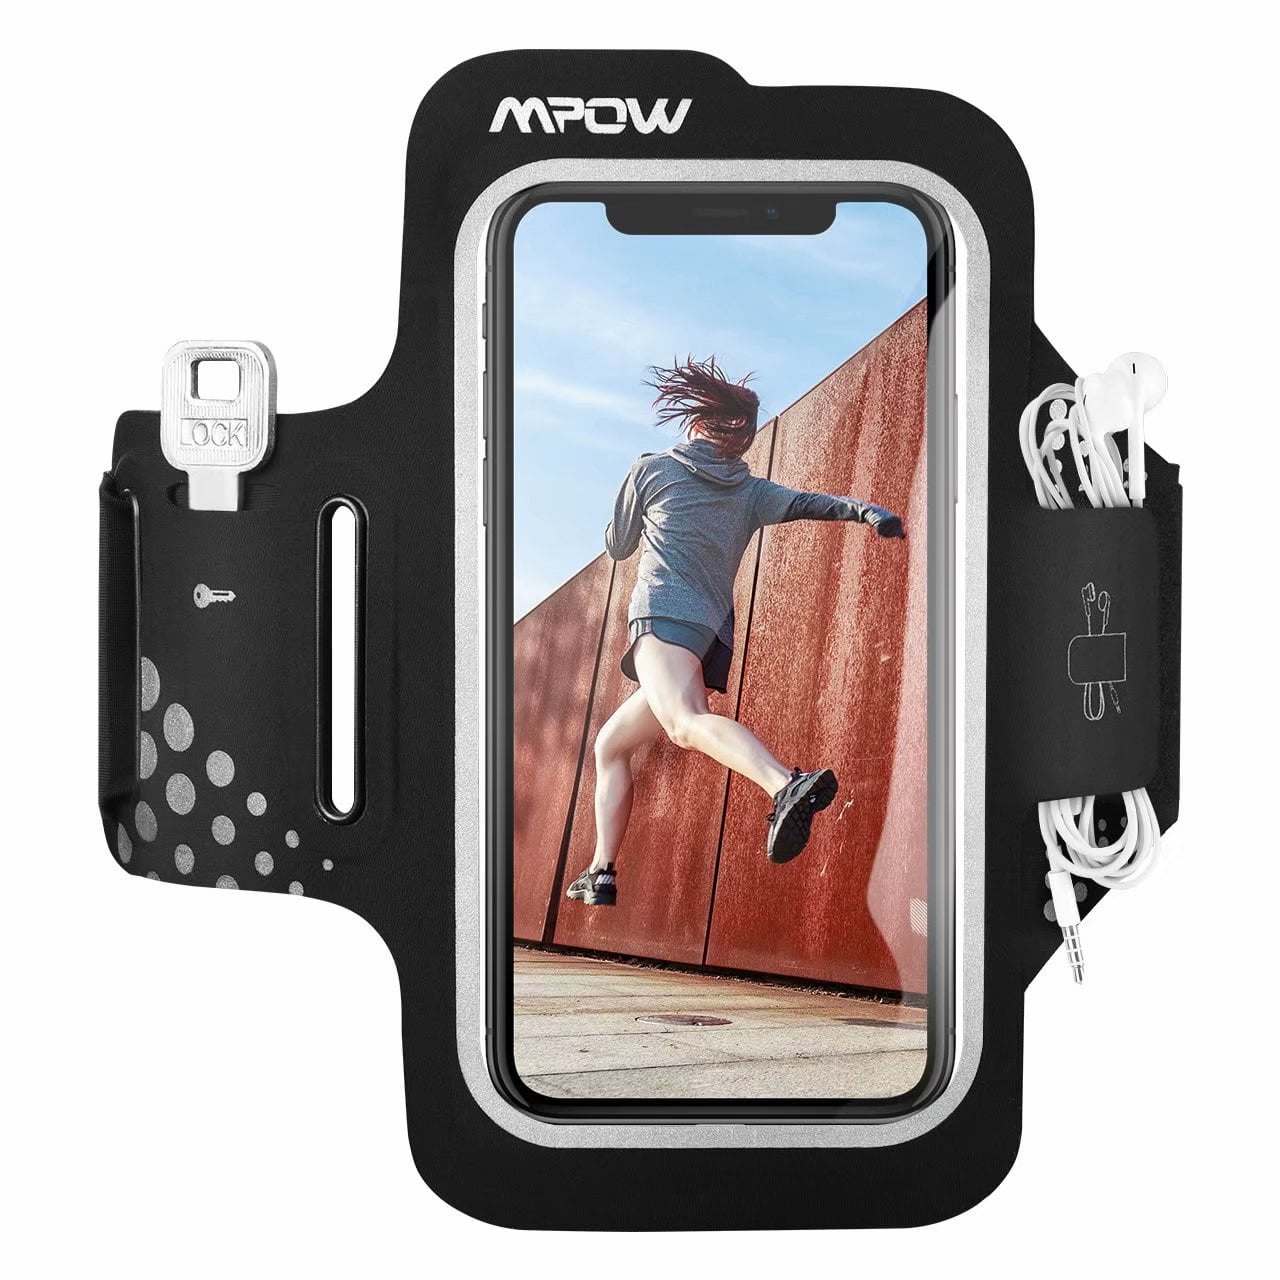 Xs Max Water Resistant Ideal Running Phone Holder XR ANJ Outdoors Elastic Lycra Running Armband for iPhone Xs Galaxy Phones Large Capacity Upper Arm Band to Hold Money Cards and Keys